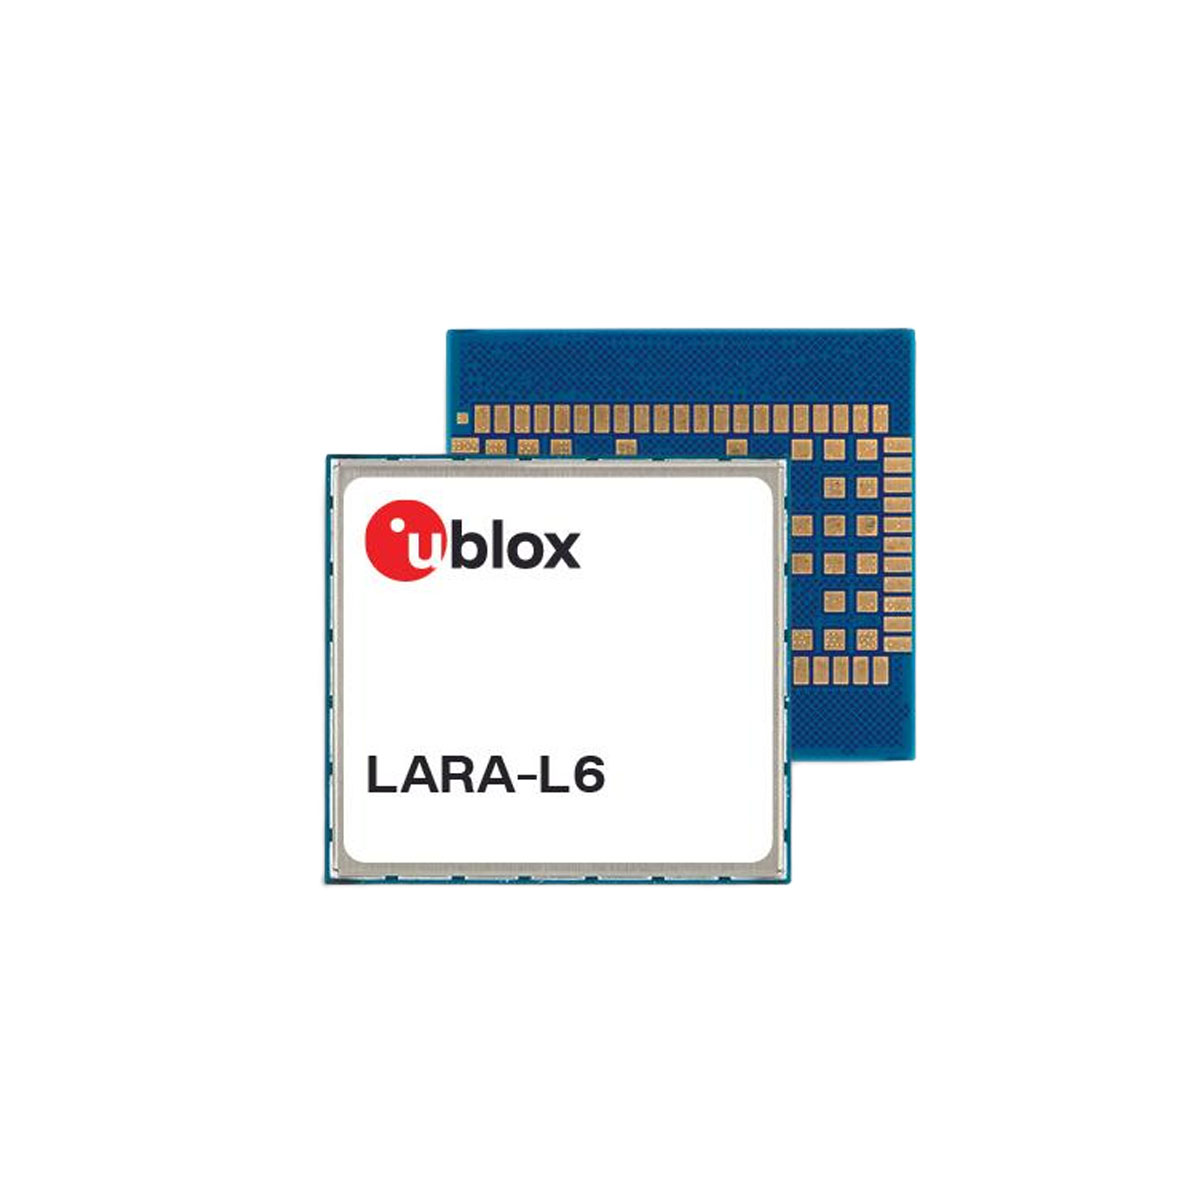 the part number is LARA-L6004-01B